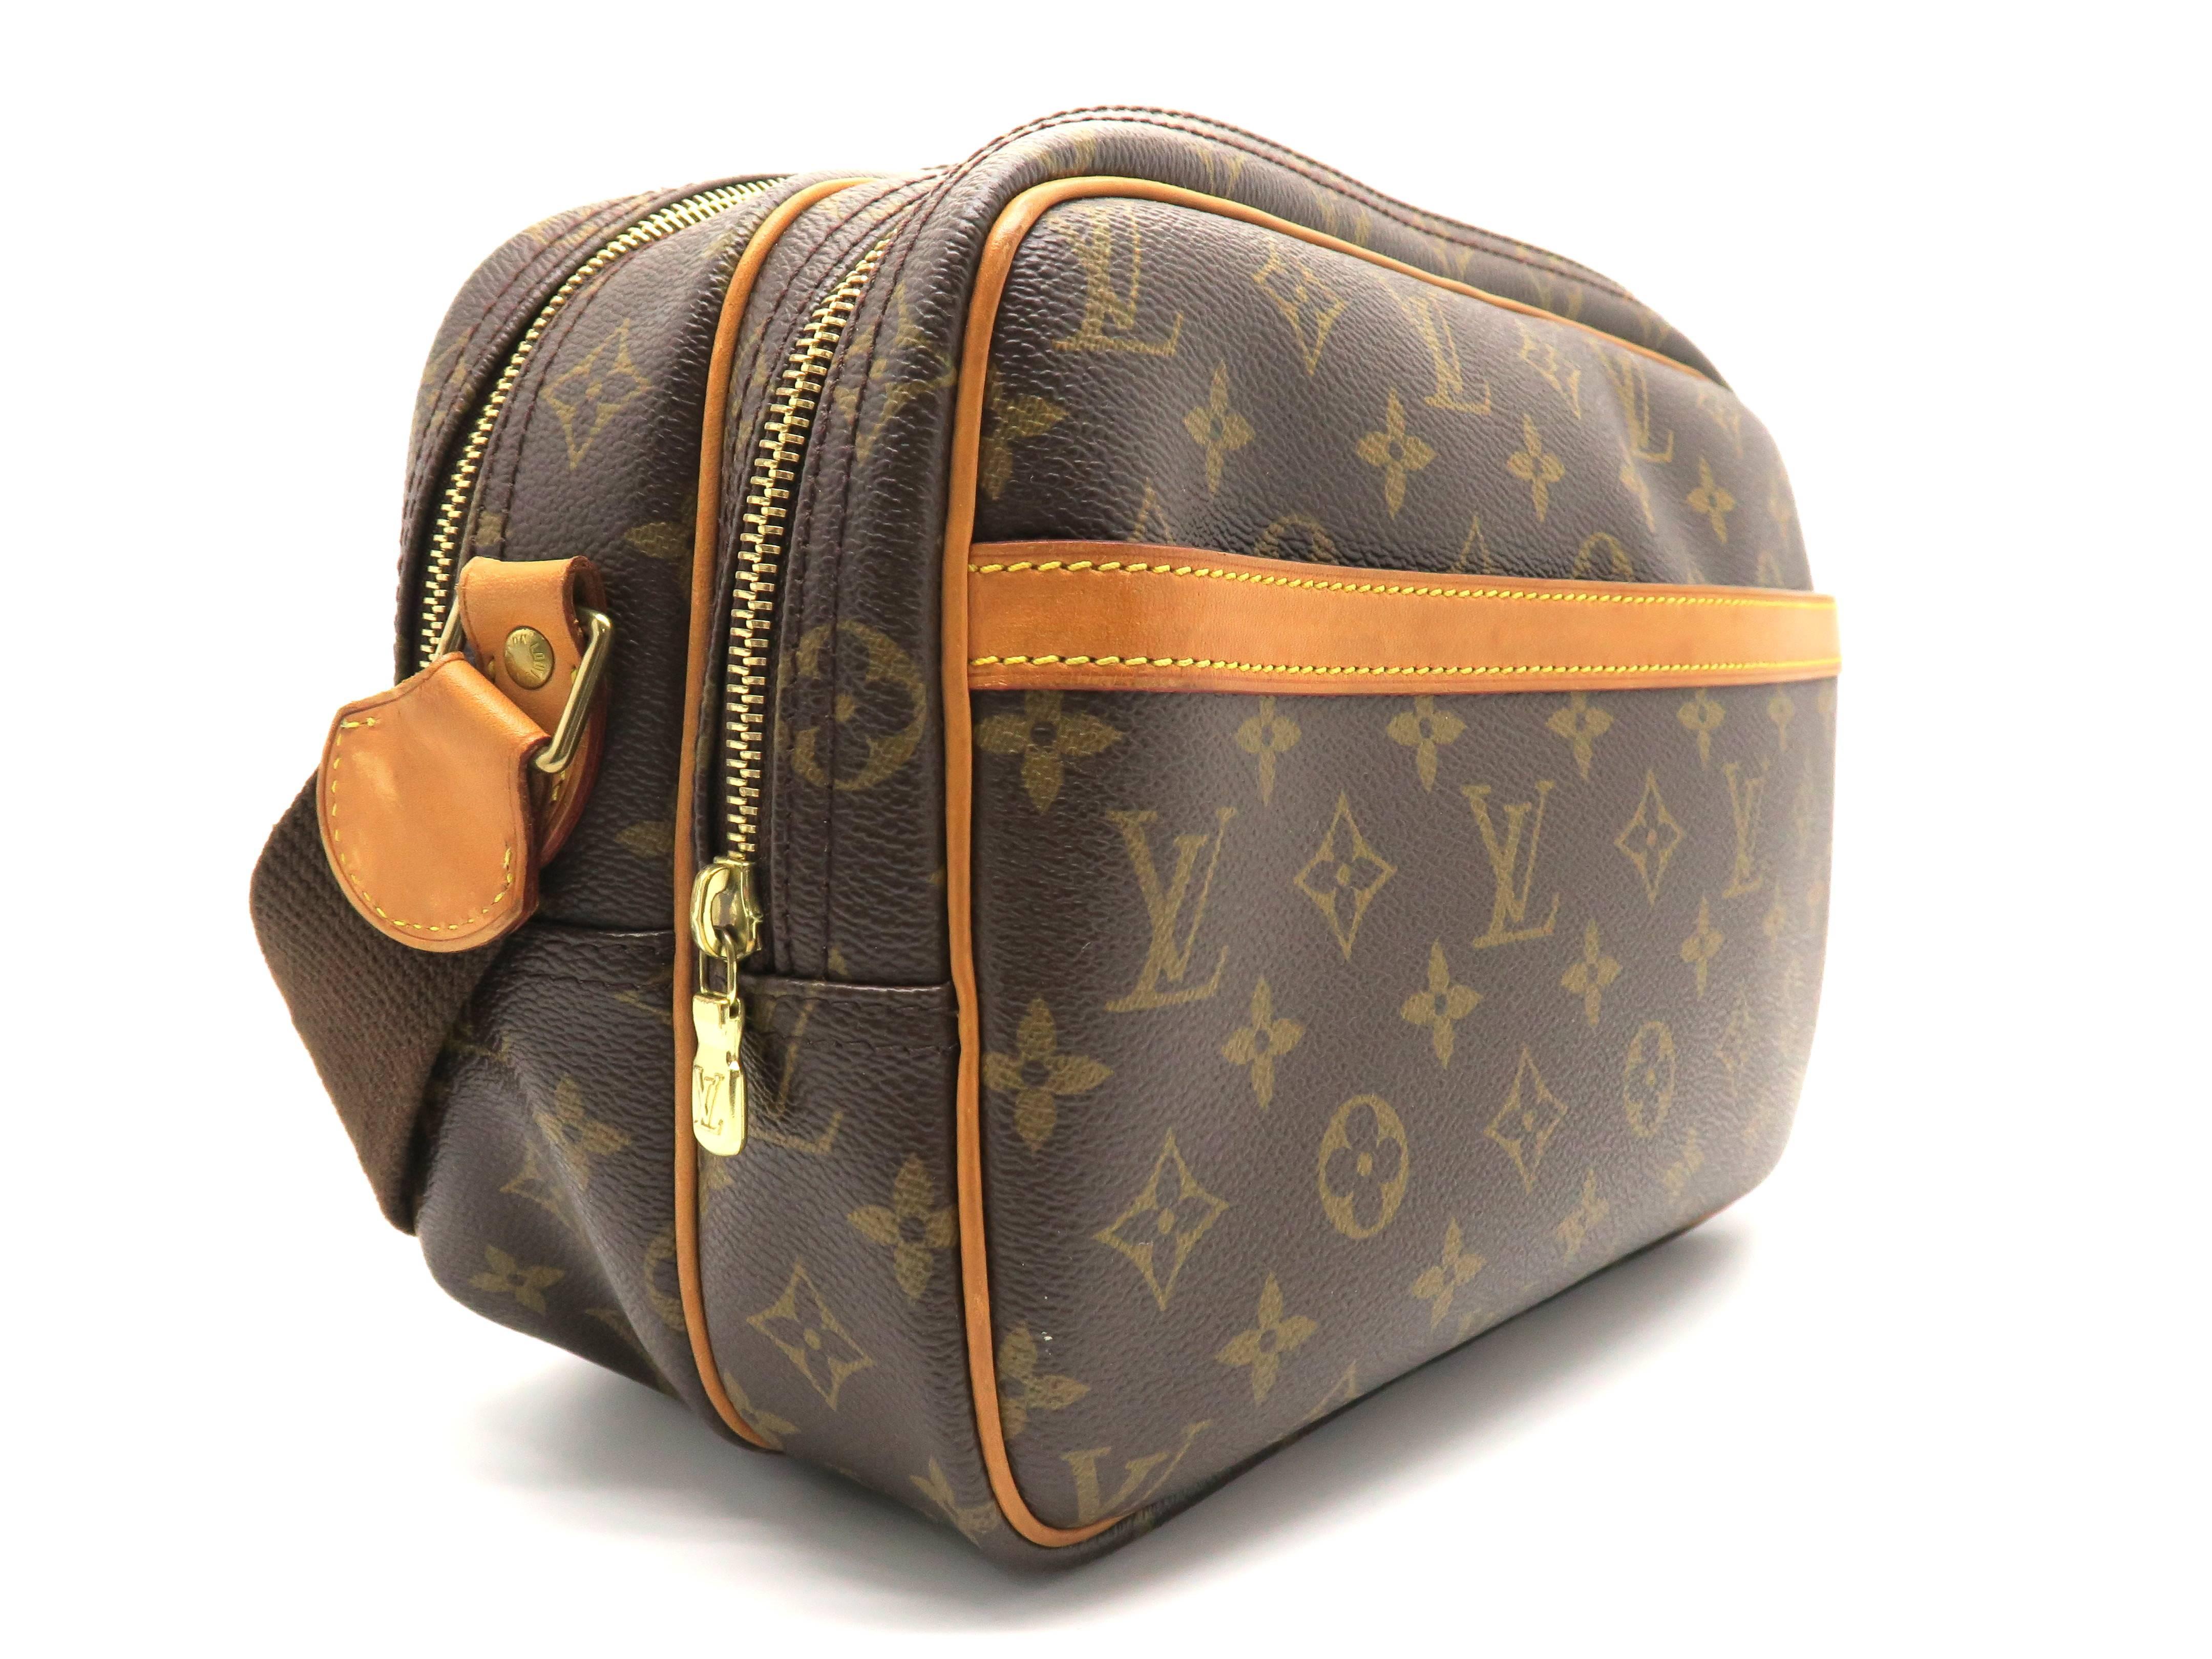 Color: Brown 

Material: Monogram Canvas

Condition: Rank A 
Overall: Good, few minor defects
Surface: Minor Stains
Corners: Minor Stains
Edges: Minor Stains
Handles/Straps: Good
Hardware: Minor Scratches

Dimension: W28 × H19 × D12cm（W11.0" ×